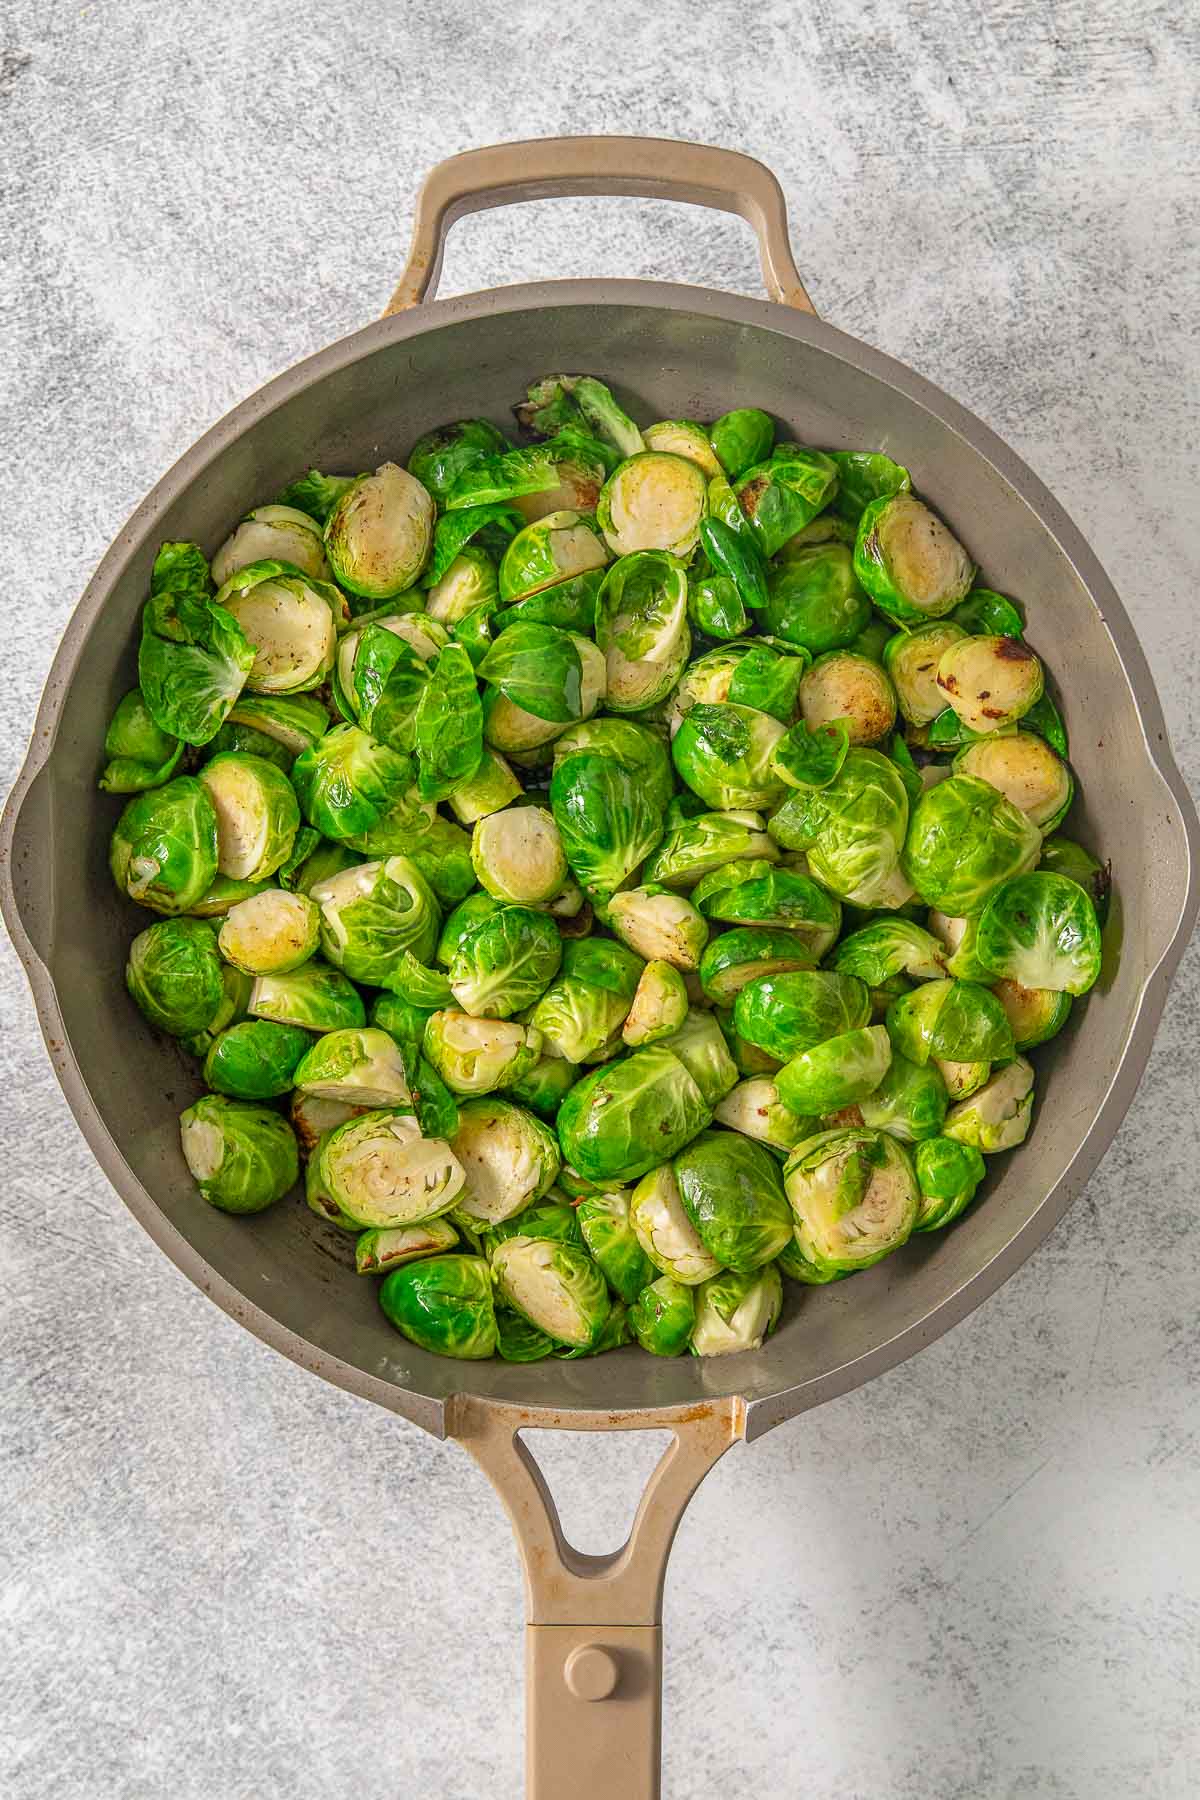 Brussel sprouts cooking in a skillet.